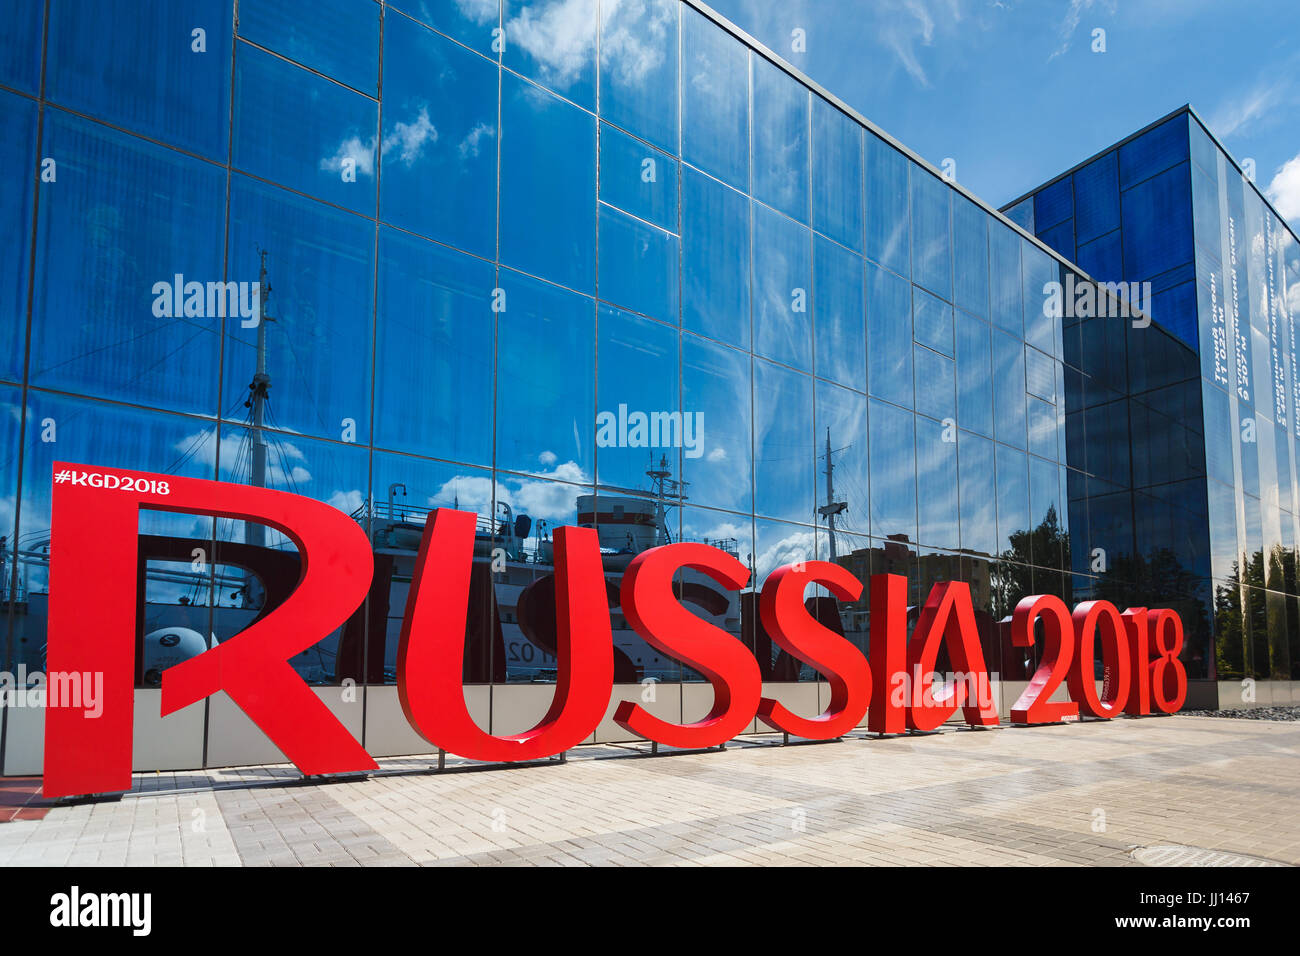 Kaliningrad, Russia - July 14 2017: Advertising sign of the Soccer World Cup 2018 near the mirror building of the Museum of the World Ocean Stock Photo